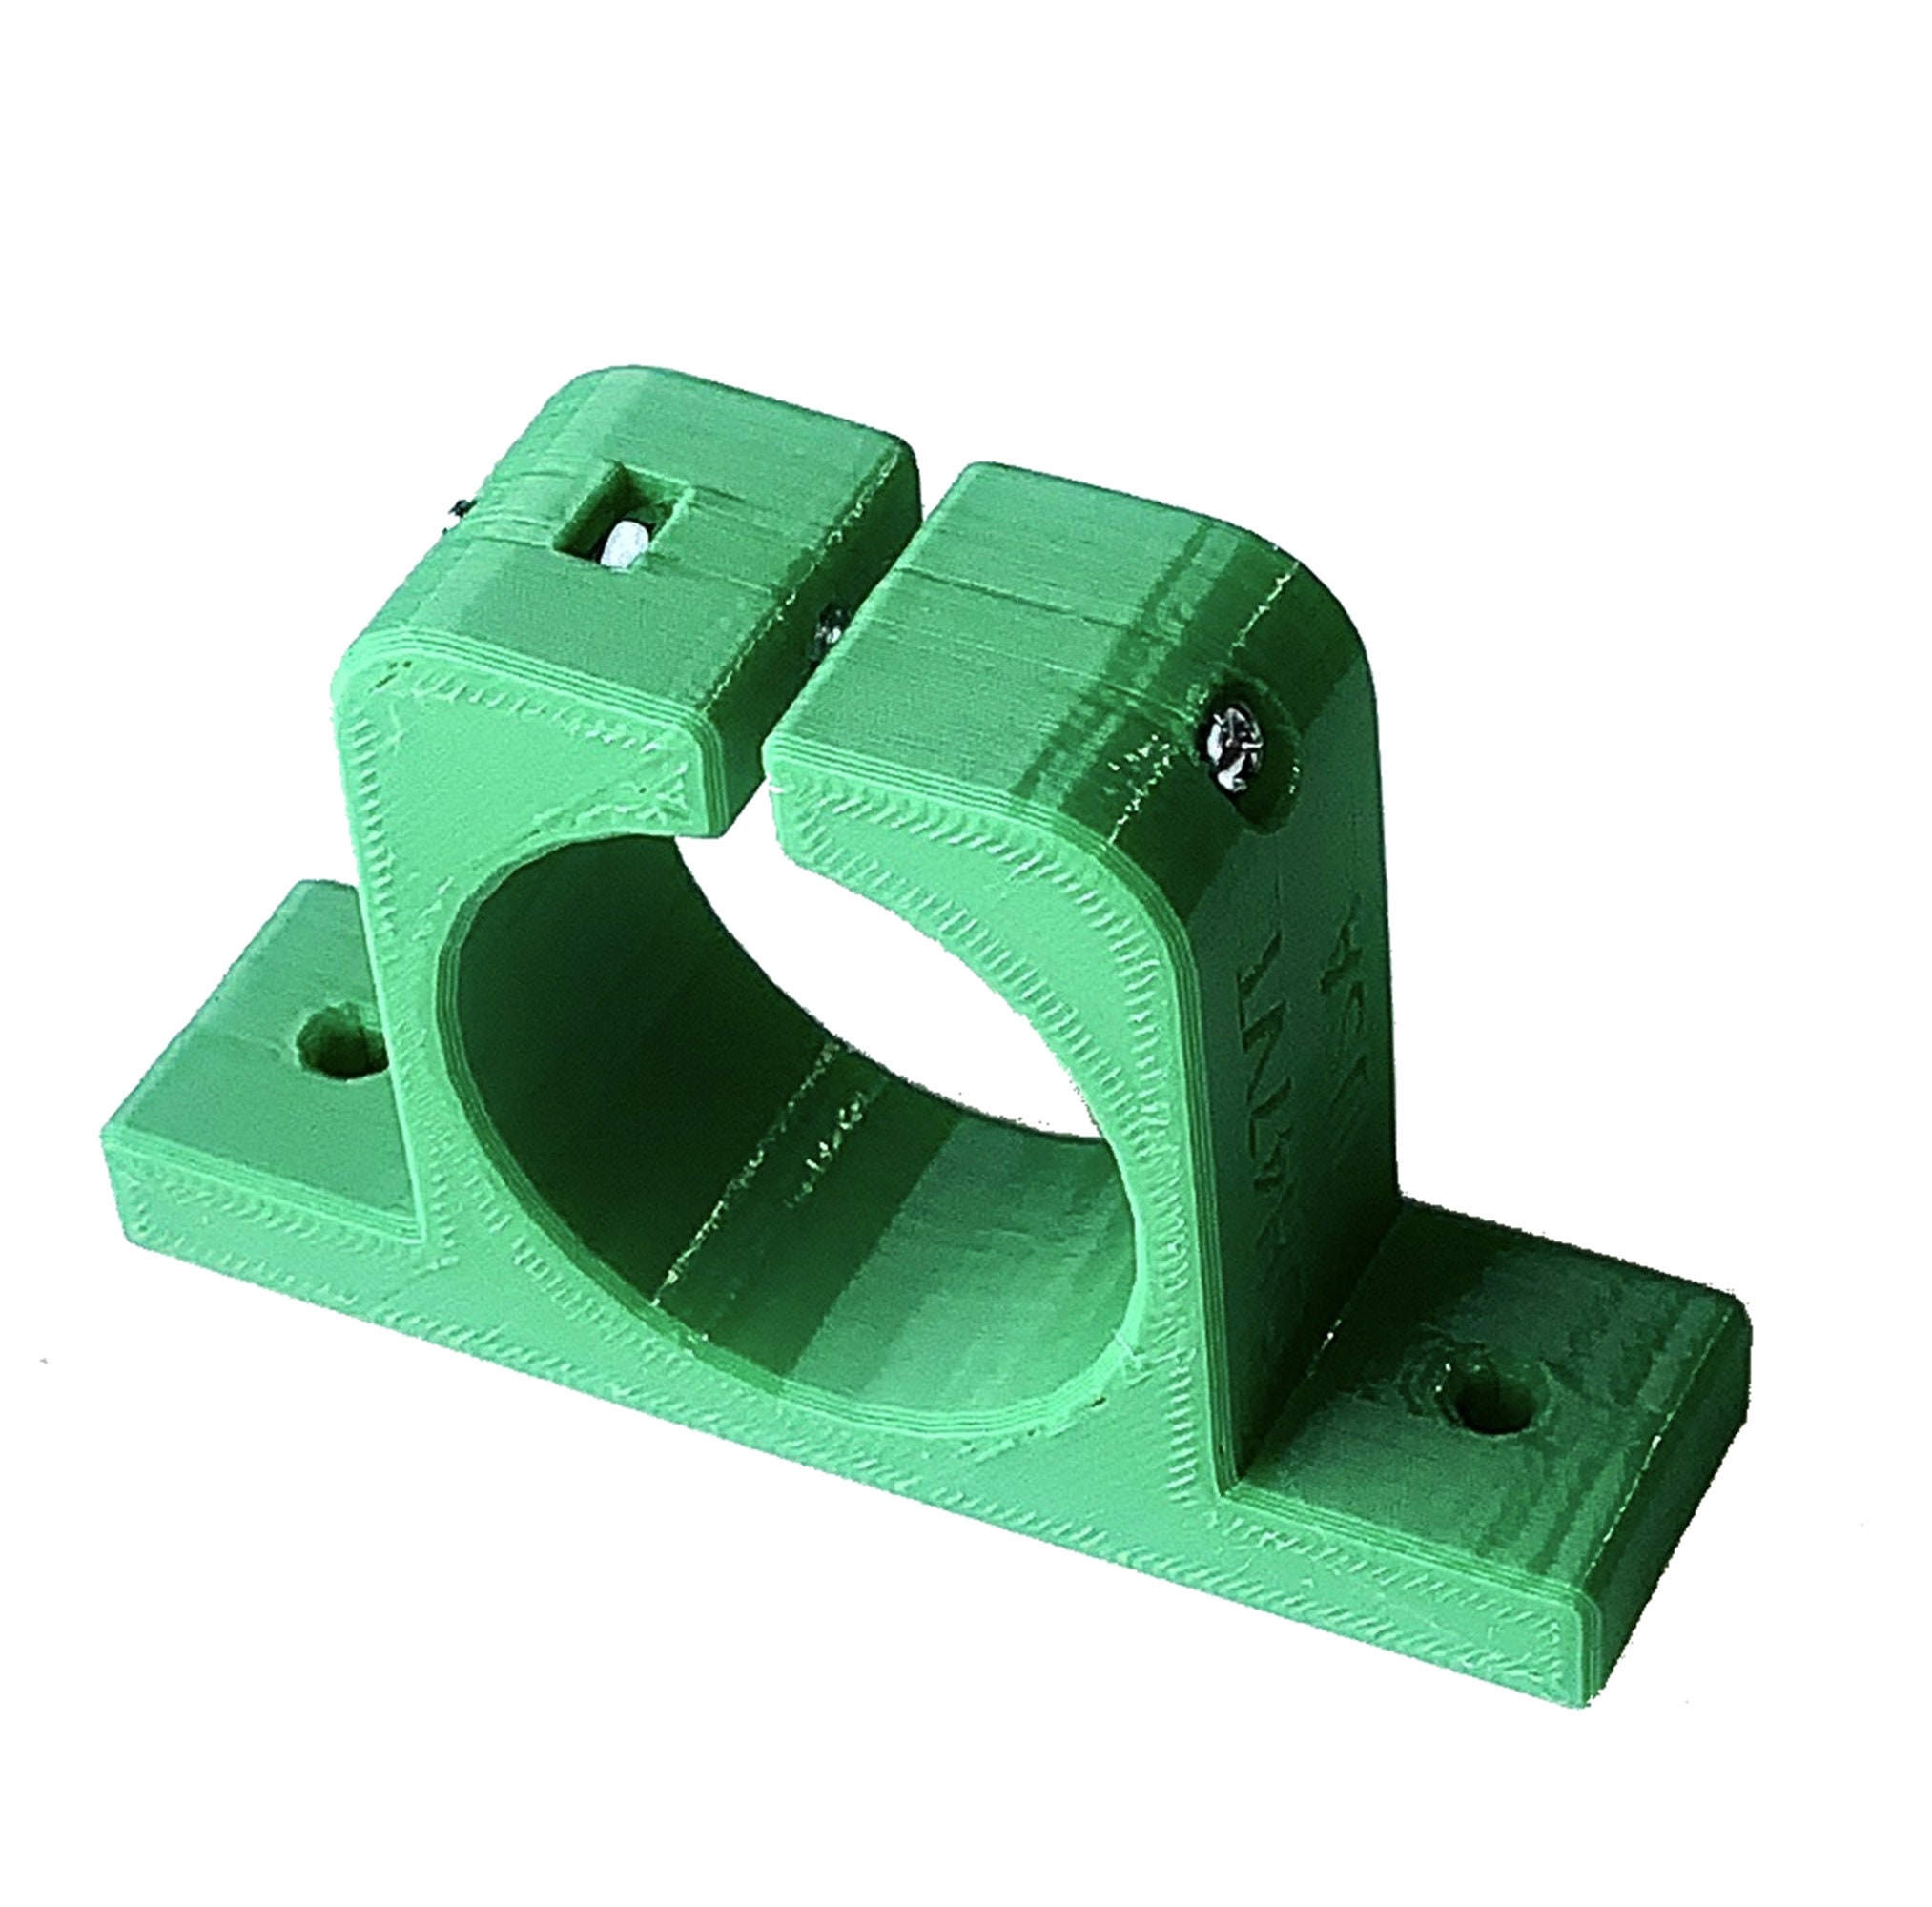 360 Degrees Rotary Tool Bracket Rotary Grinder Stand Holder Clamp-On Holder  21In Dremel Stand Holder Clamp-on Support Tool